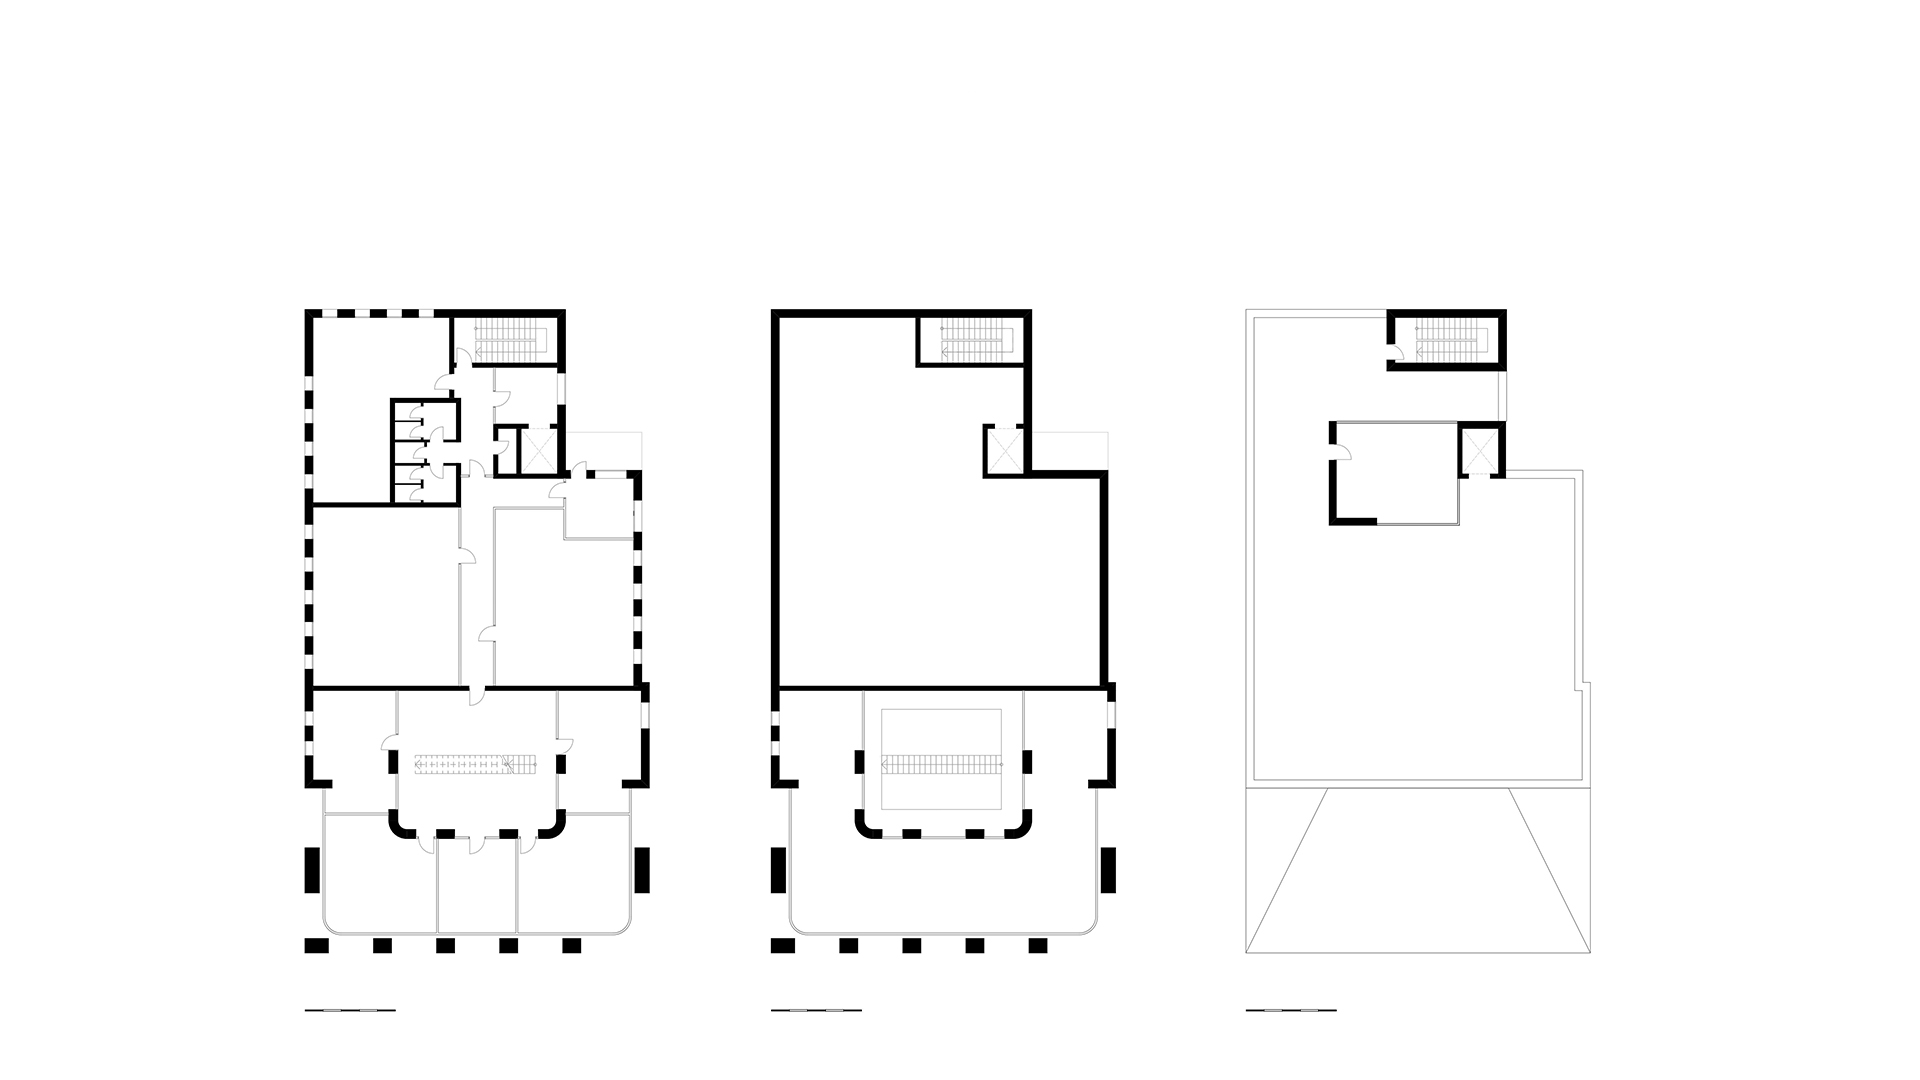 Office building layout